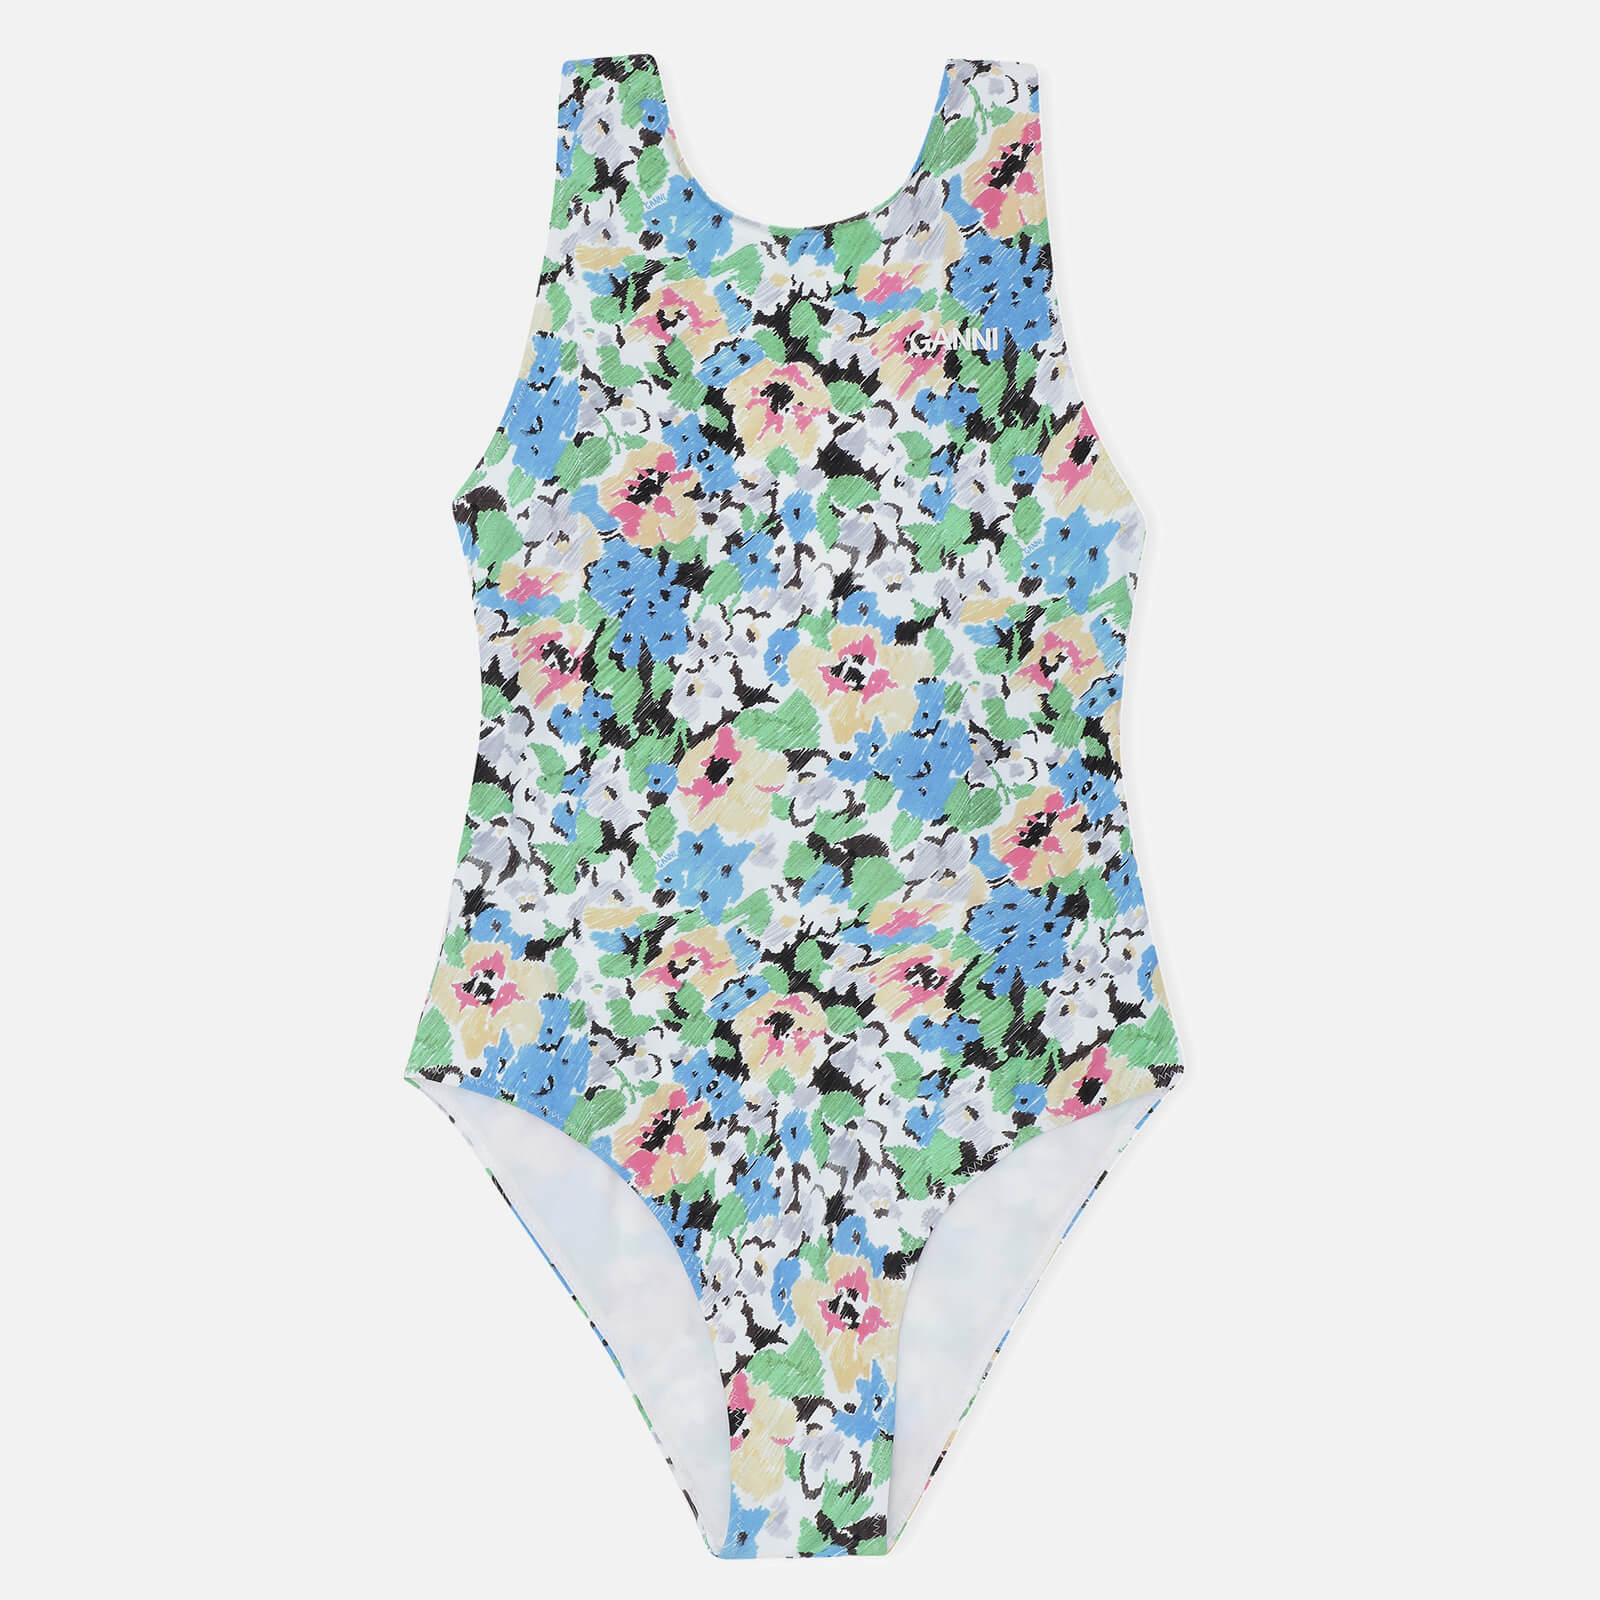 Ganni Women's Recycled Printed Floral Swimsuit - Floral Azure Blue - EU 34/UK 6